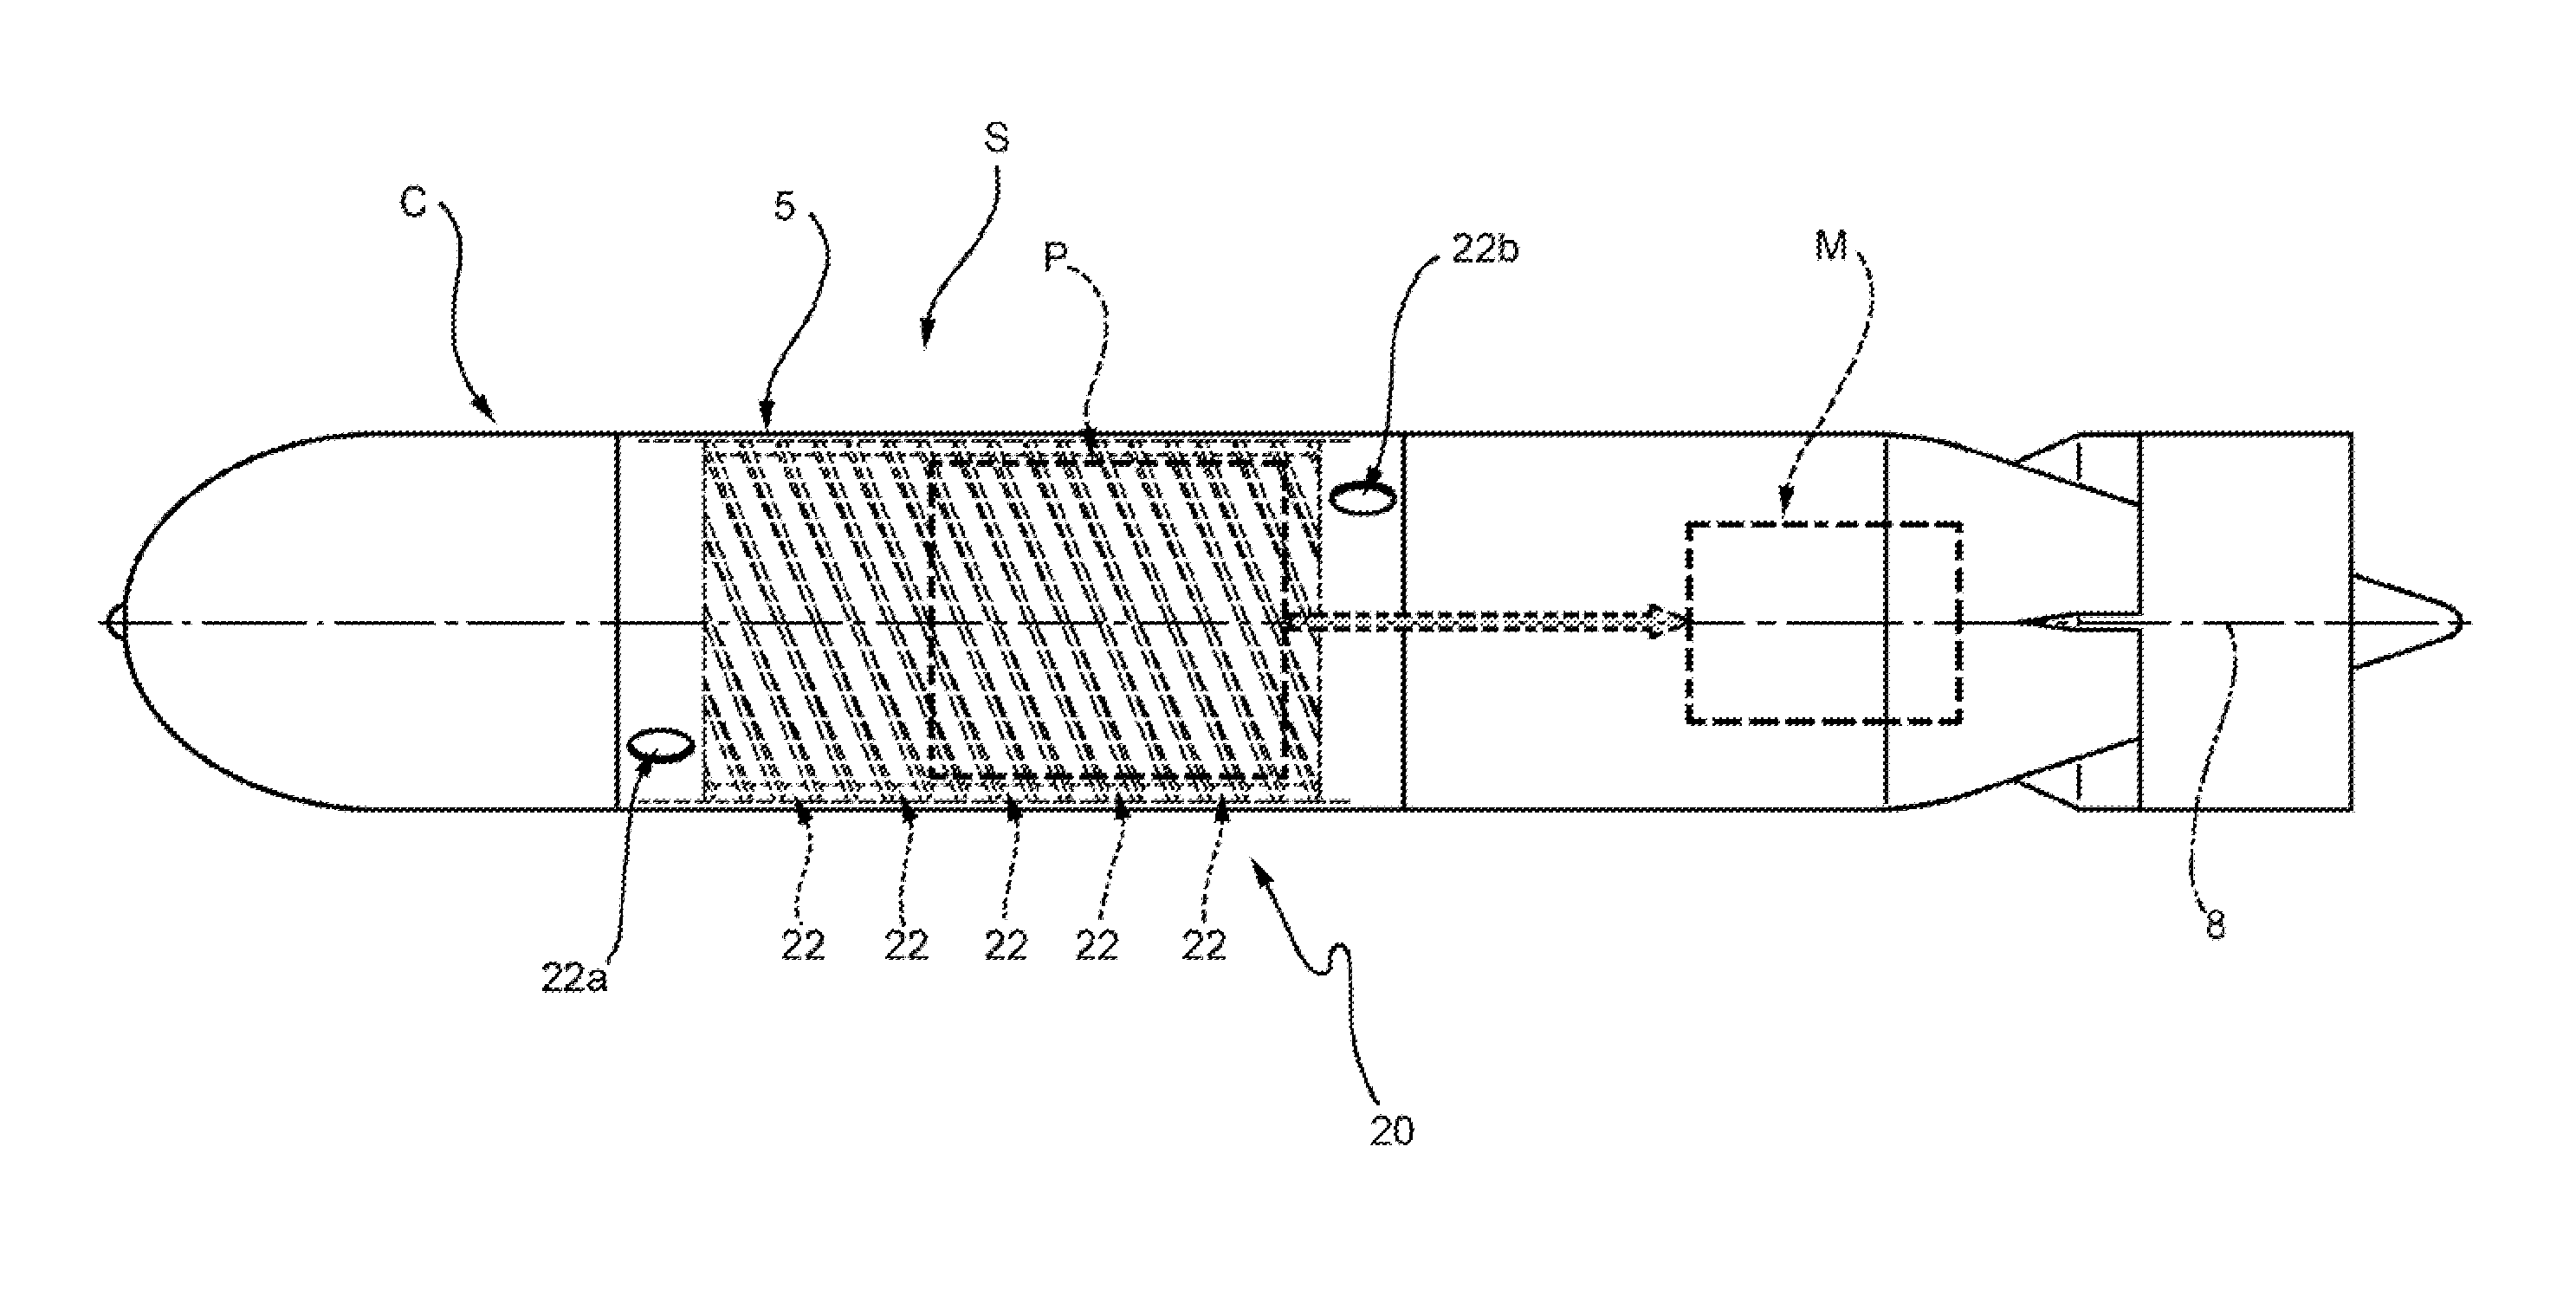 Underwater vehicle provided with heat exchanger